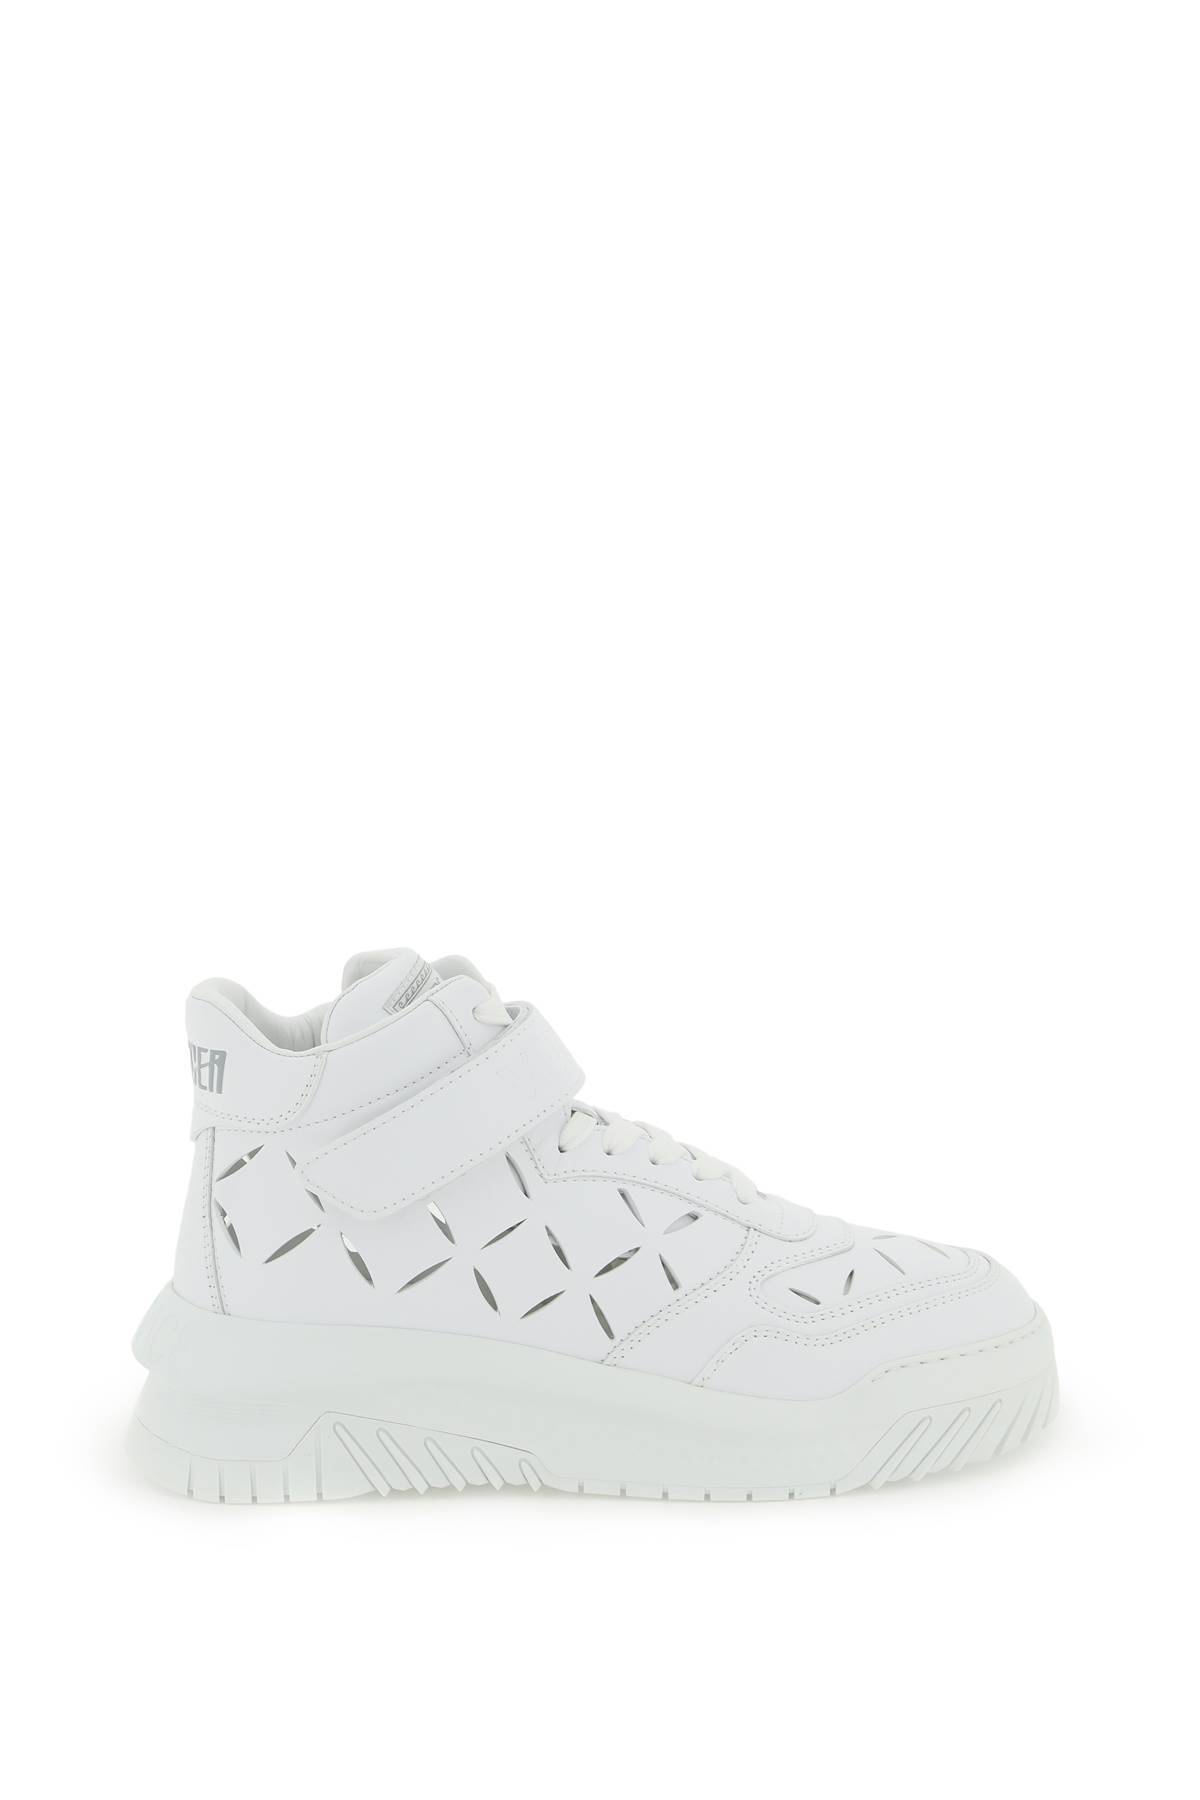 Versace VERSACE 'odissea' sneakers with cut-outs